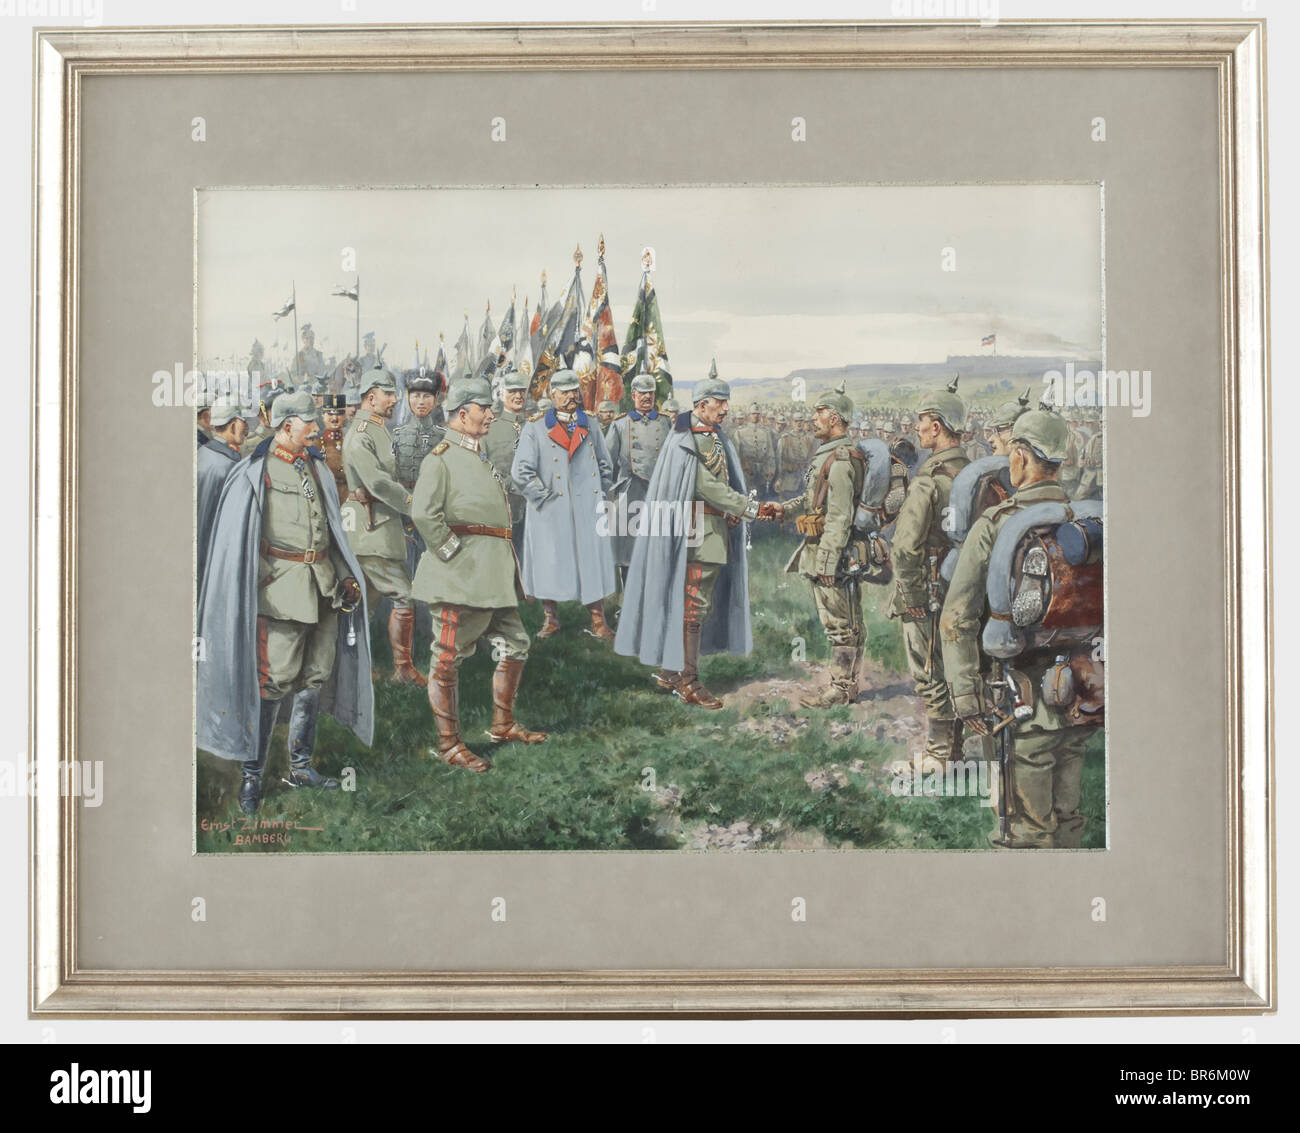 Ernst Zimmer (1864 - 1924) - 'The Emporer presents the Iron Cross to the Heroes of Nowo-Georgiewsk', gouache on paper. Scene at the Eastern Front on 20 August 1915. Wilhelm II awards the orders to brave soldiers, behind him General Field Marshal von Hindenburg, Ludendorff, General von Beseler, Prince Joachim, Prince Oskar and General von Falkenhayn. Signed on the lower left 'Ernst Zimmer Bamberg'. Dimensions 52 x 70 cm, in passepartout, modern gilt profiled frame. Ernst Zimmer was first trained as a porcelain painter before he attended the Danzig school of arts, Stock Photo